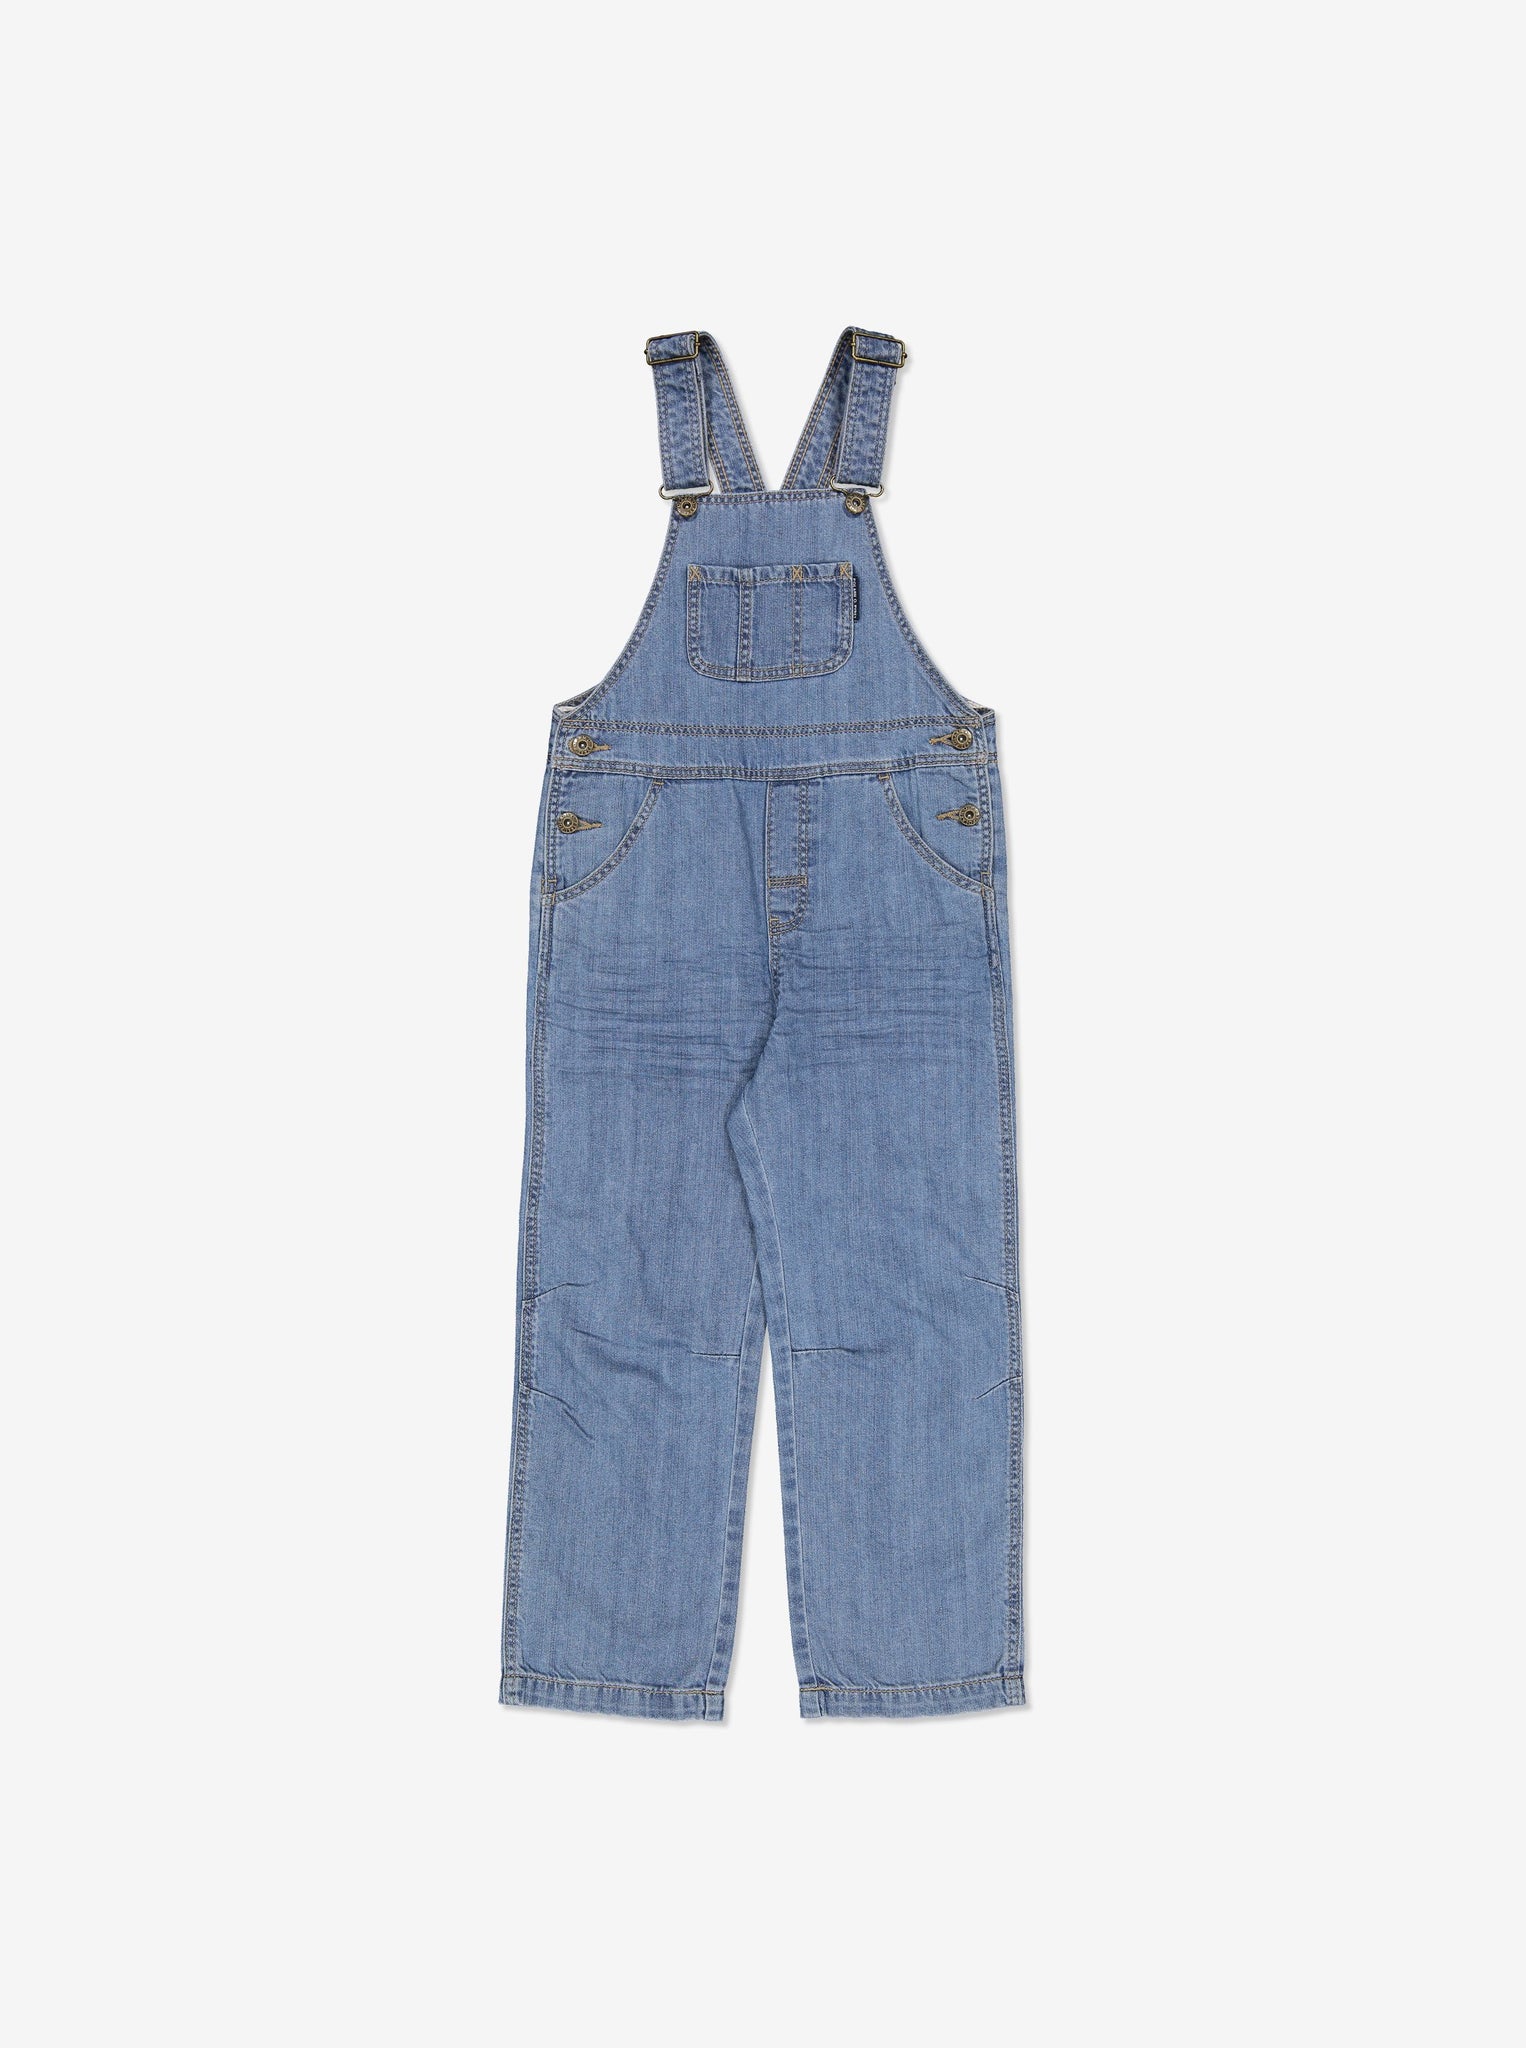 Organic denim unisex jean overalls for toddlers with adjustable shoulder straps, a large chest pocket and two back pockets.